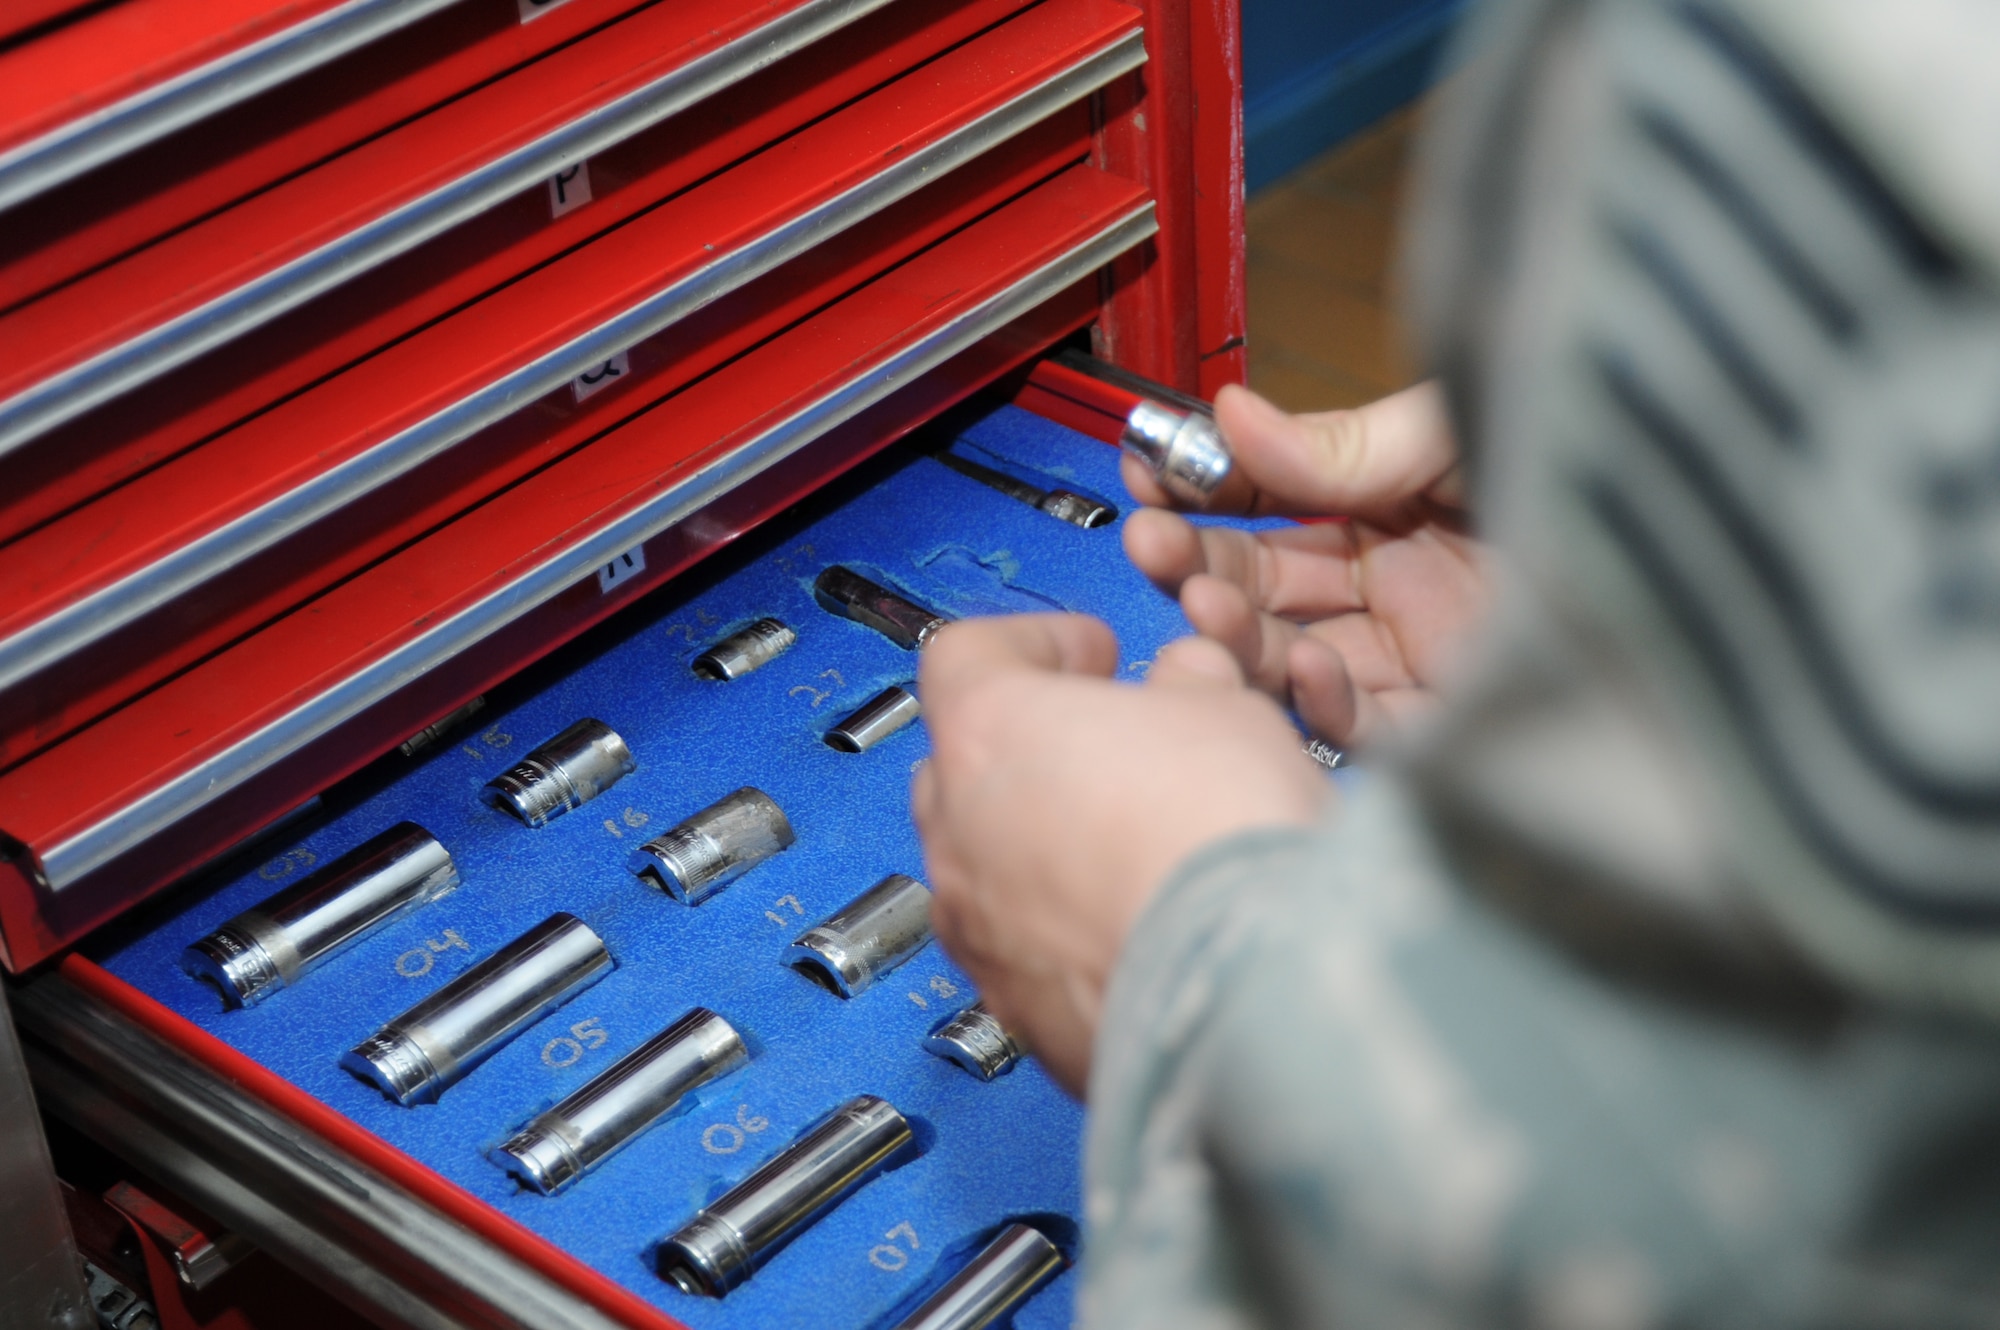 U.S. Air Force Tech. Sgt. Kristina Green, 52nd Equipment Maintenance Squadron conventional munitions maintenance assistant NCO in charge from Vallejo, Calif., inspects tools March 10, 2014, at Spangdahlem Air Base, Germany. An inventory must be completed every time a drawer is opened for accountability of the tools. (U.S. Air Force photo by Airman 1st Class Dylan Nuckolls/Released)